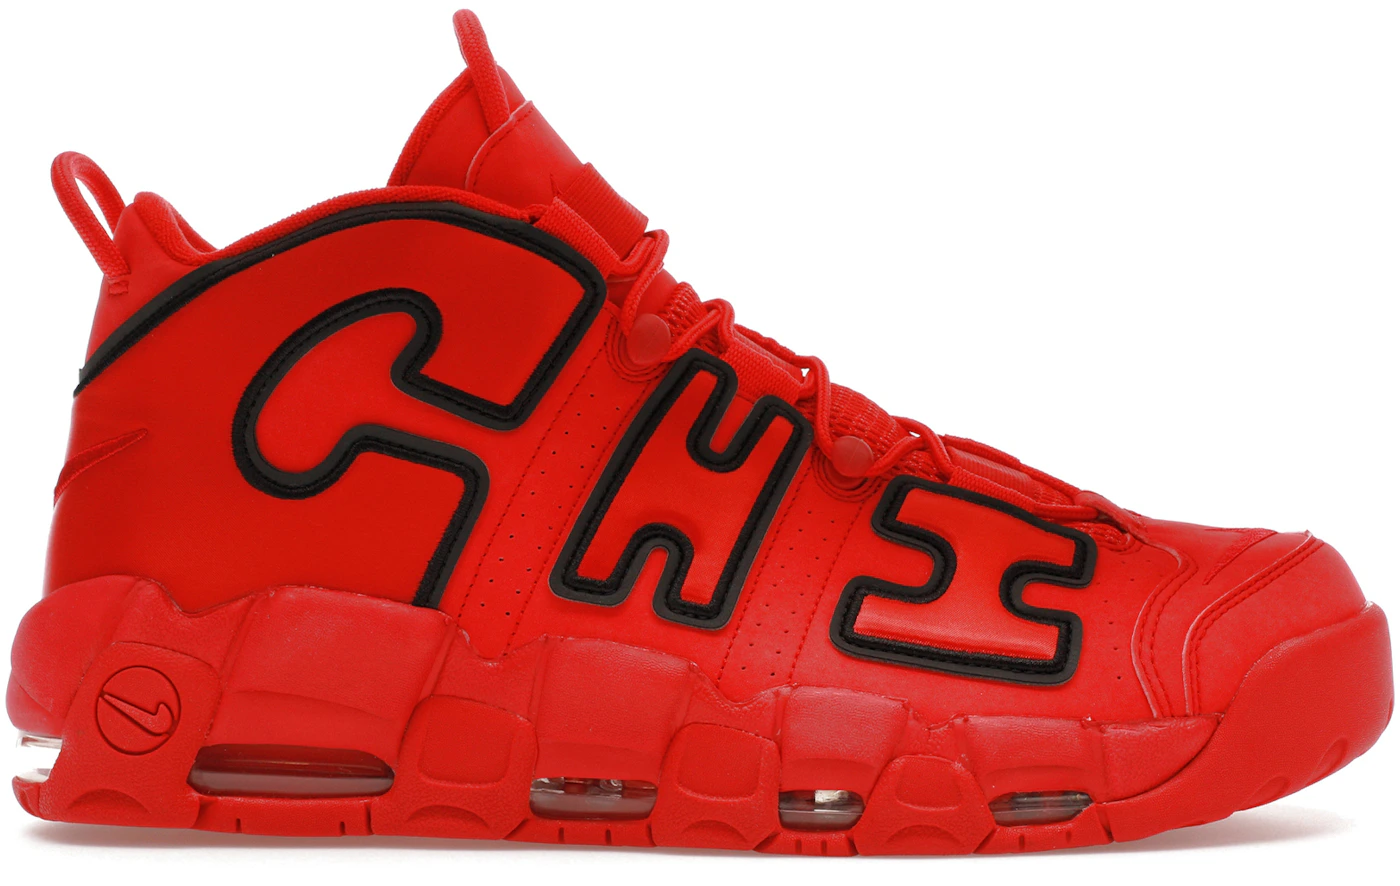 Complex Sneakers on X: .@OBJ_3 with the custom Supreme Uptempo